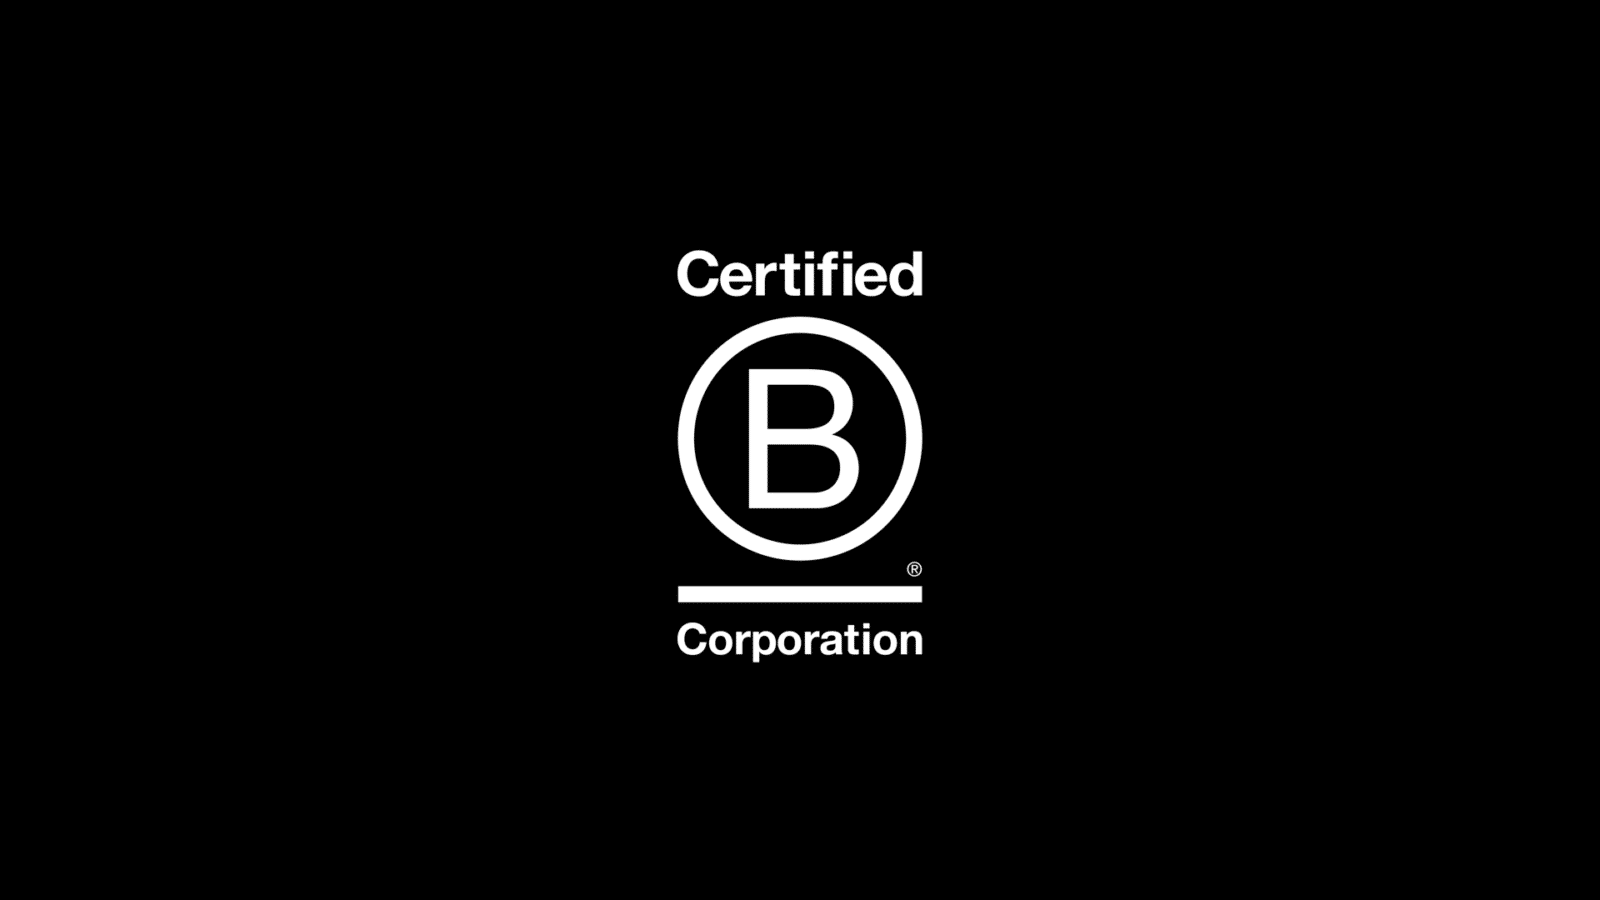 Becoming a B-Corp